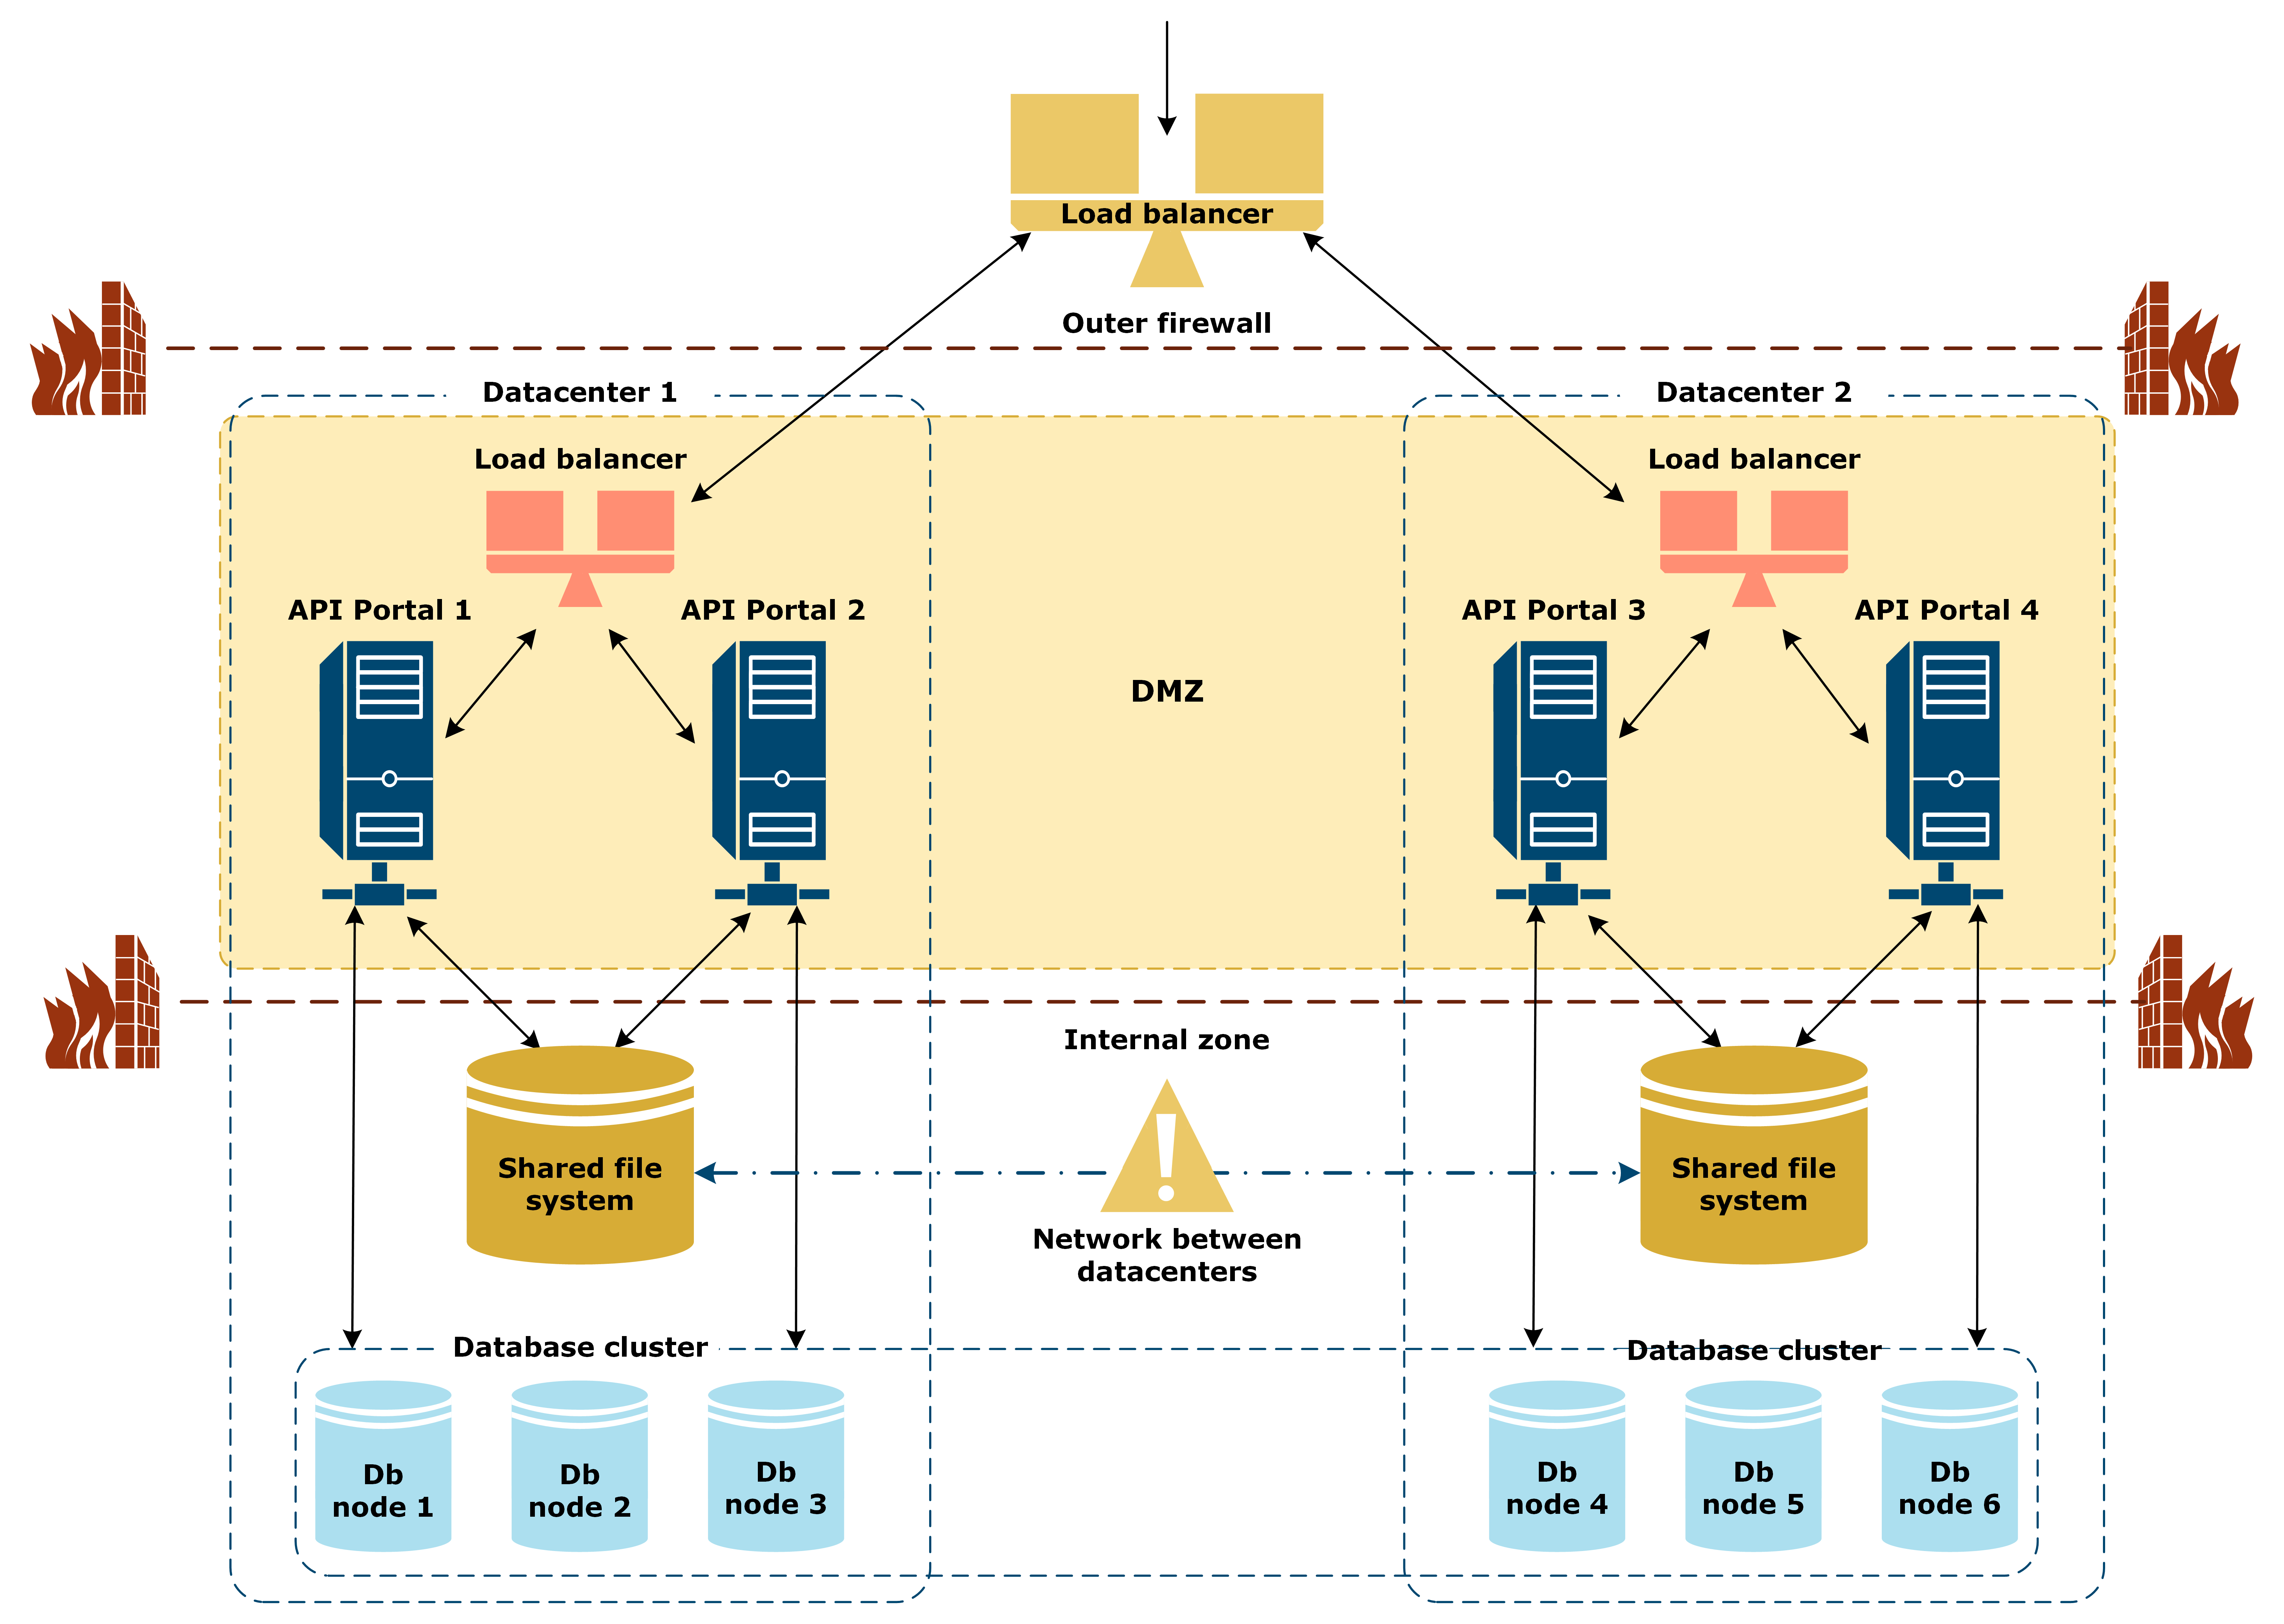 Illustration of the API Portal multi-datacenter reference architecture with failed network between the datacenters